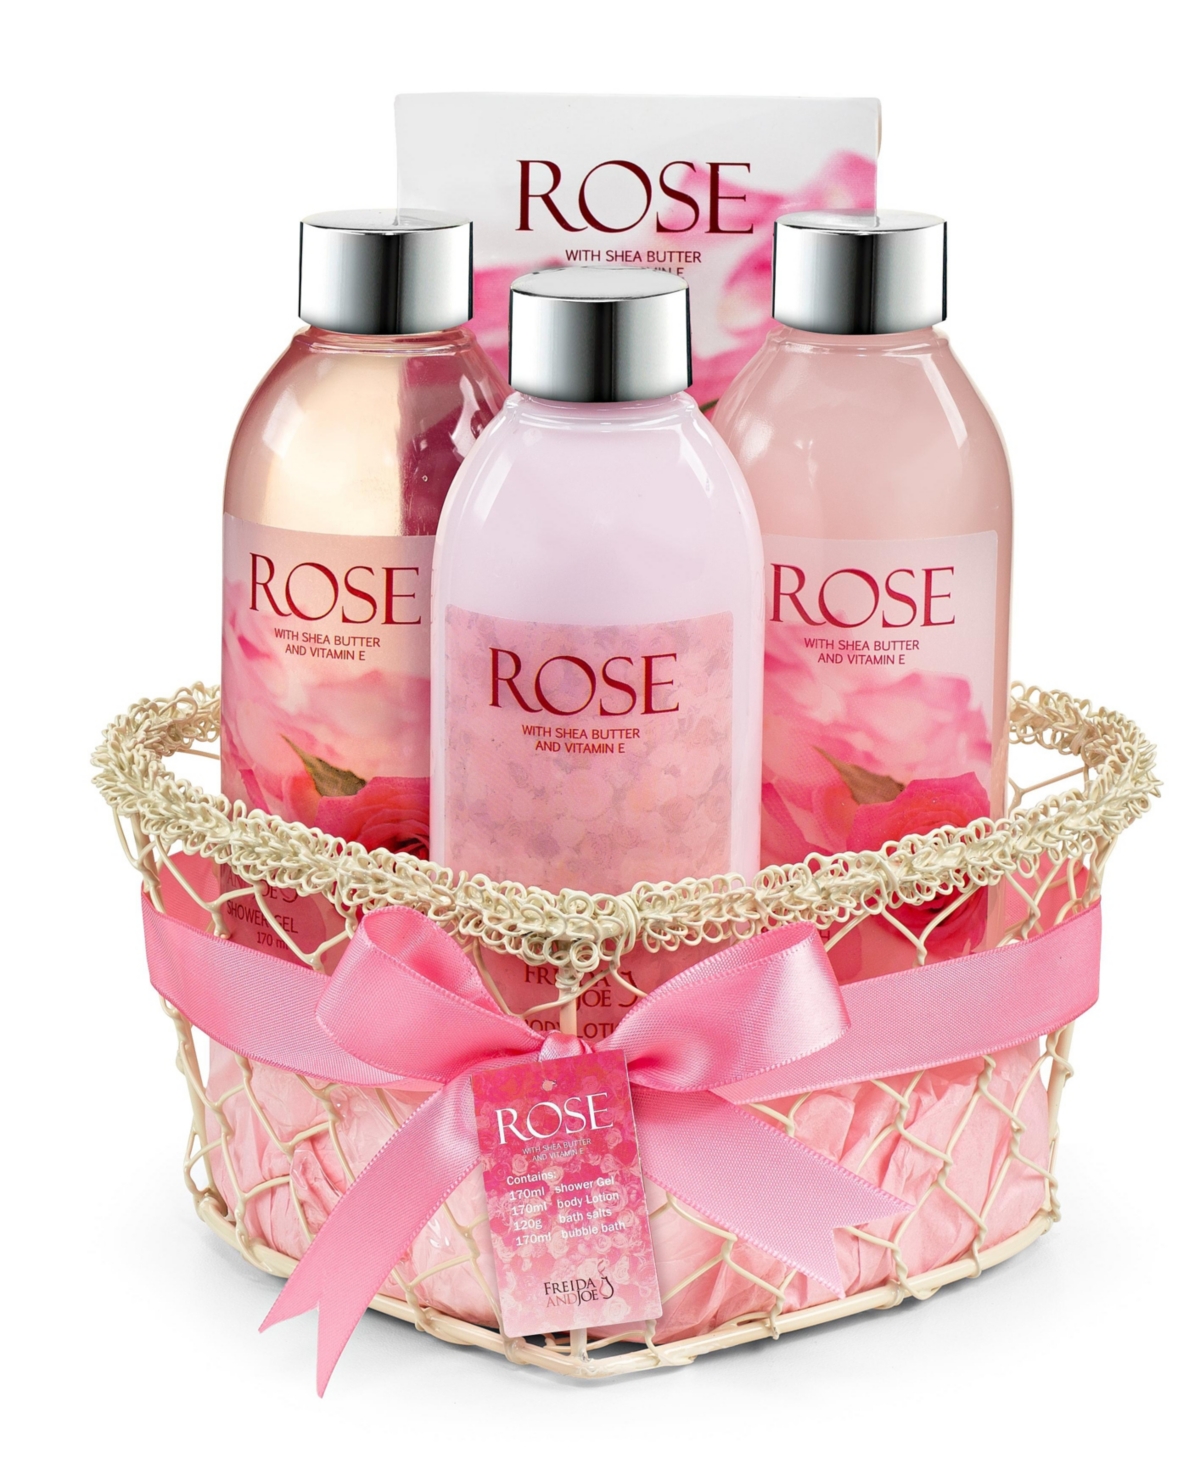 Rose Fragrance Bath & Body Spa Love Basket Set Luxury Body Care Mothers Day Gifts for Mom - Pink